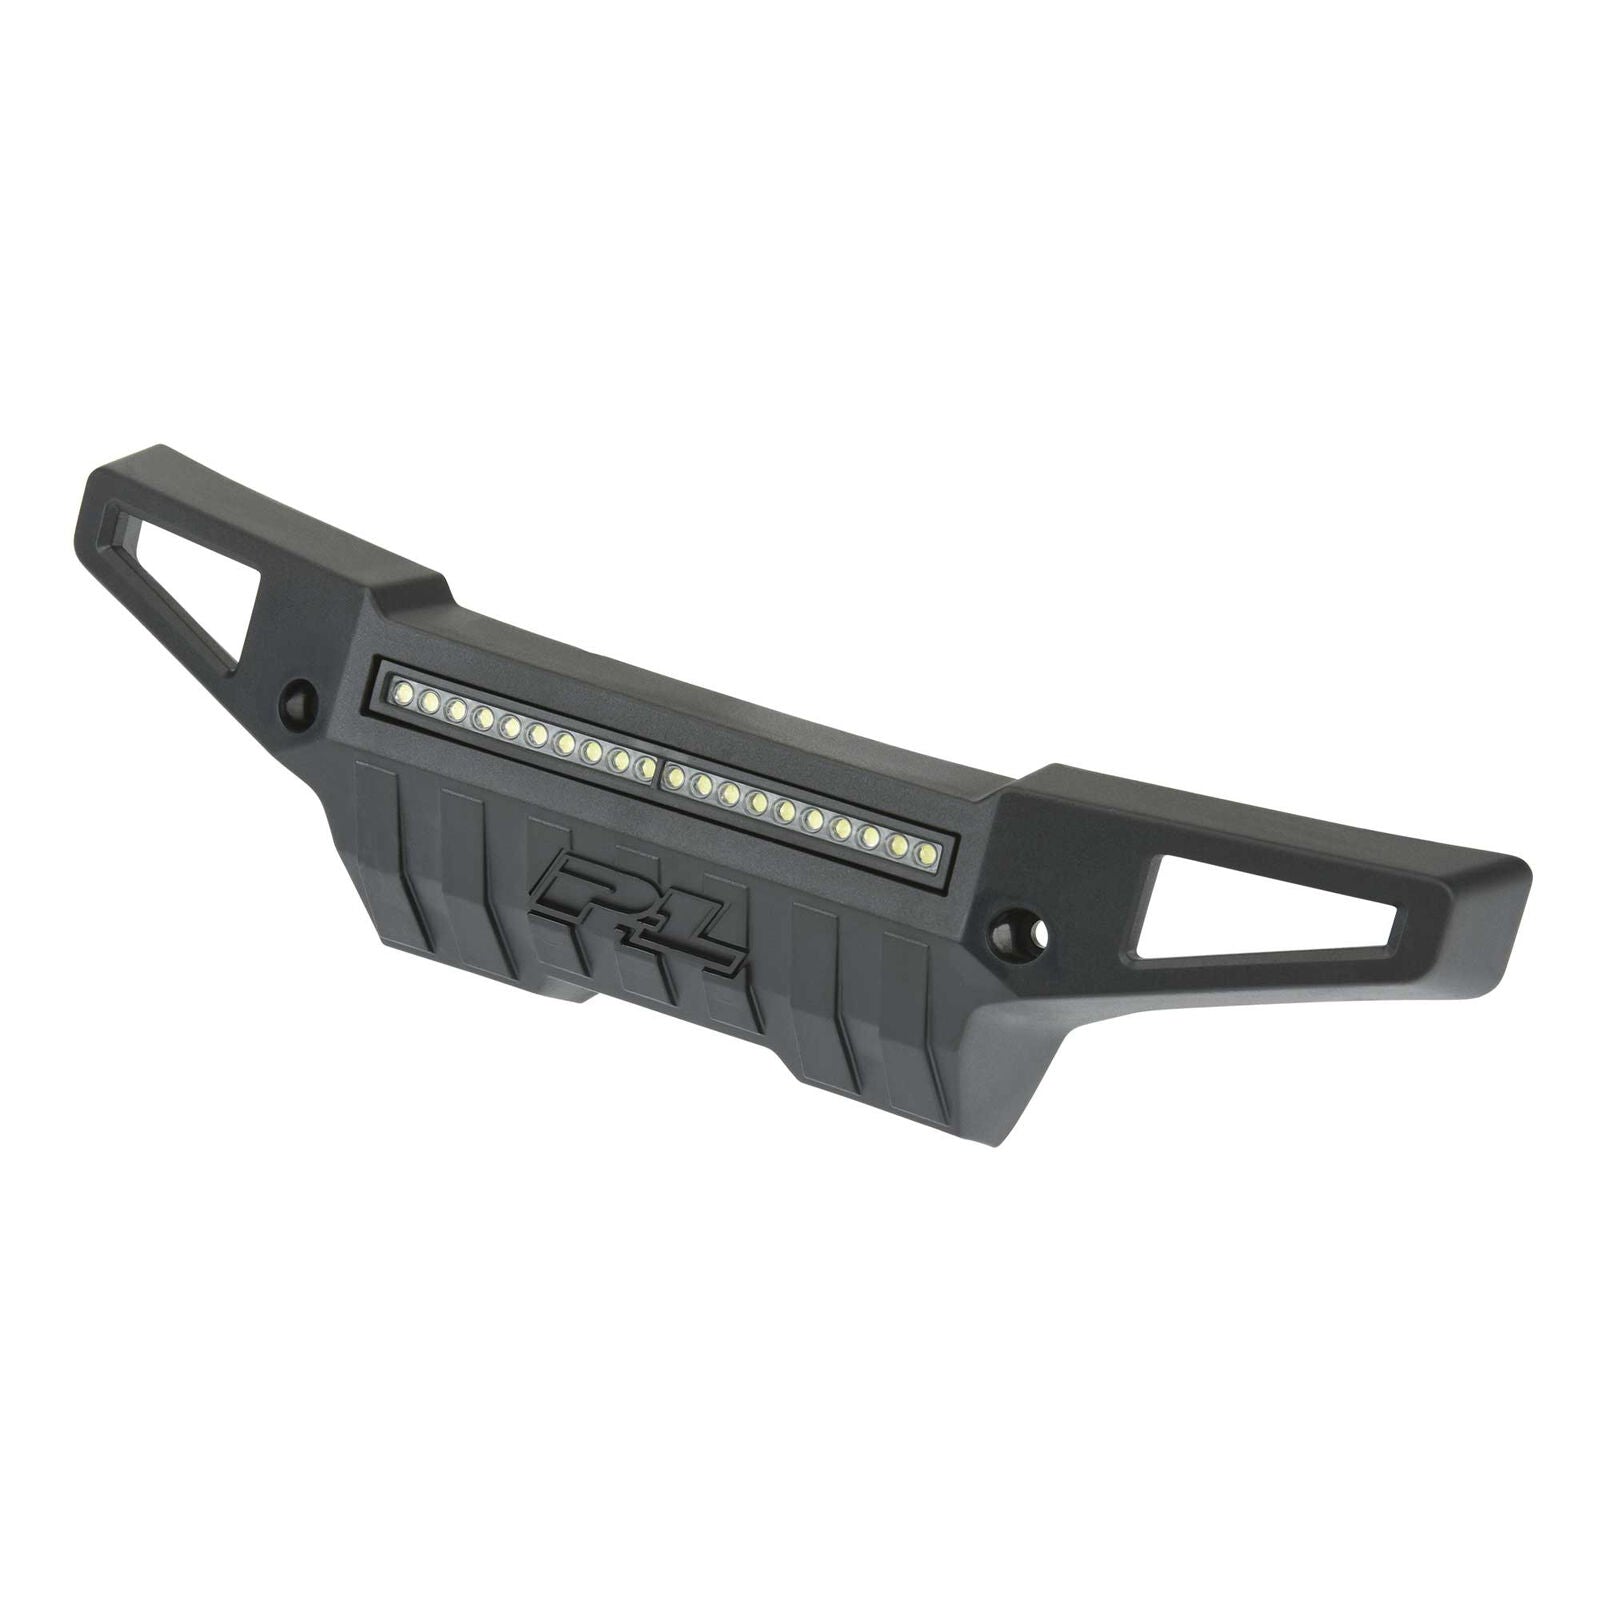 PROLINE 6342-01 1/5 PRO-Armor Front Bumper with 4 LED Light Bar for X